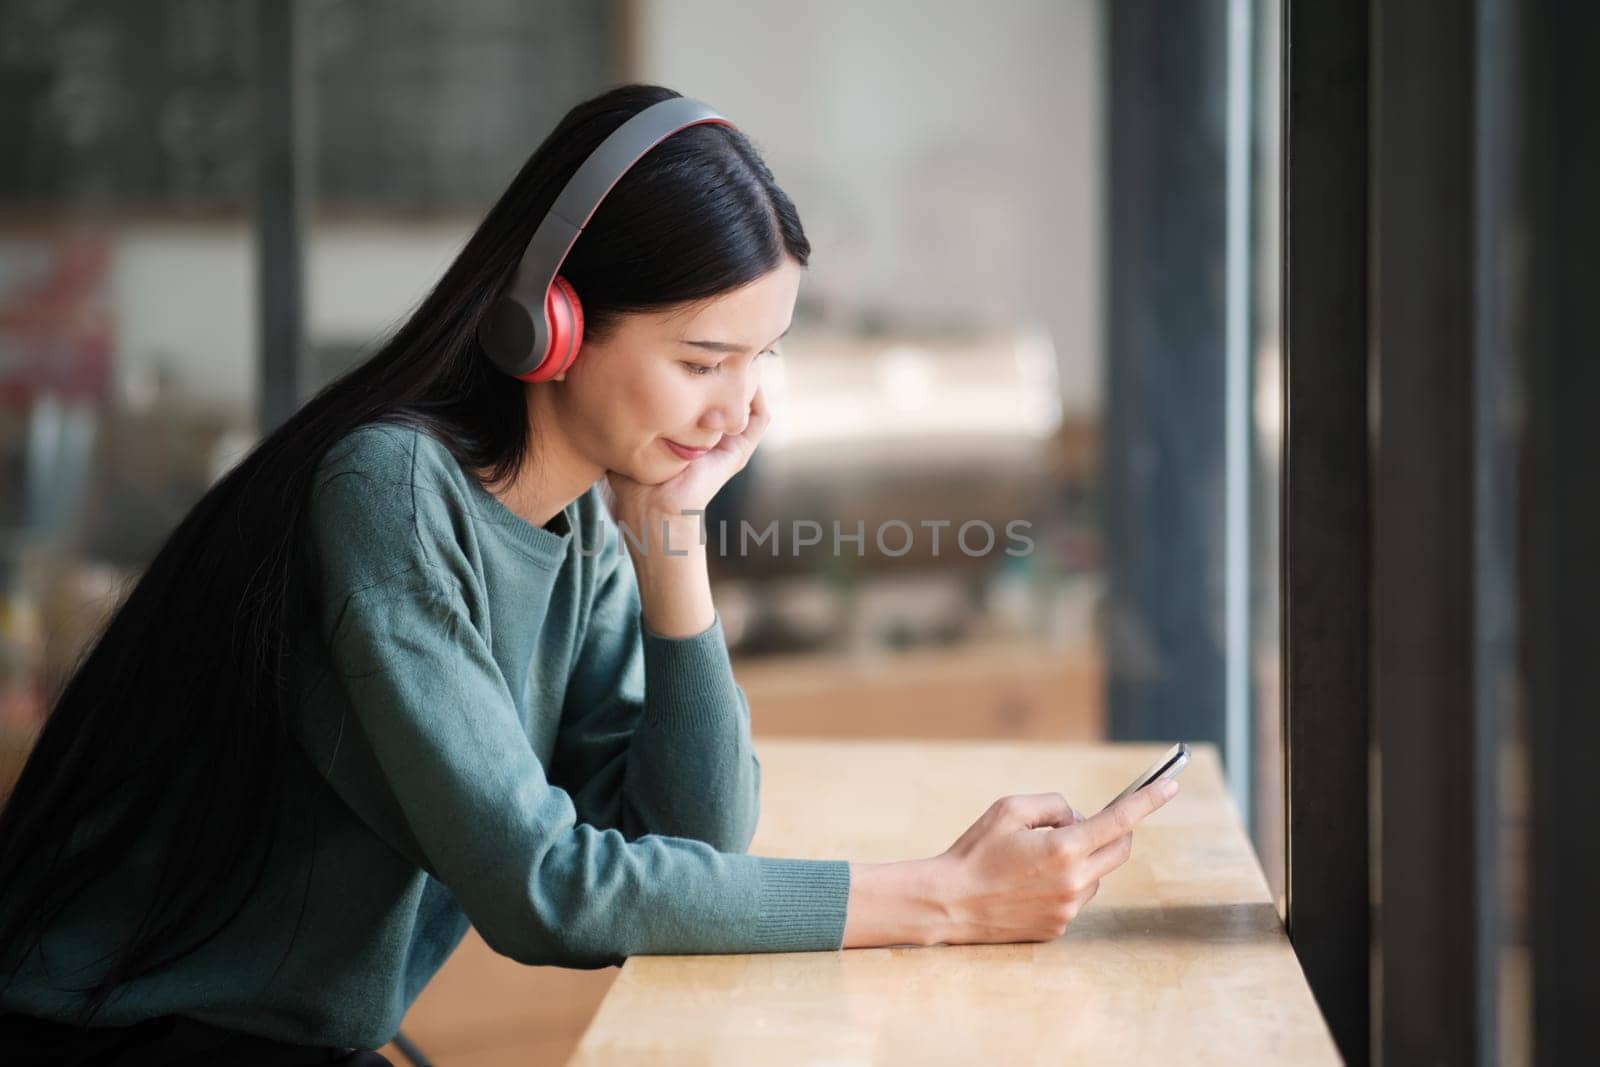 A woman wearing headphones is looking at her cell phone by ijeab